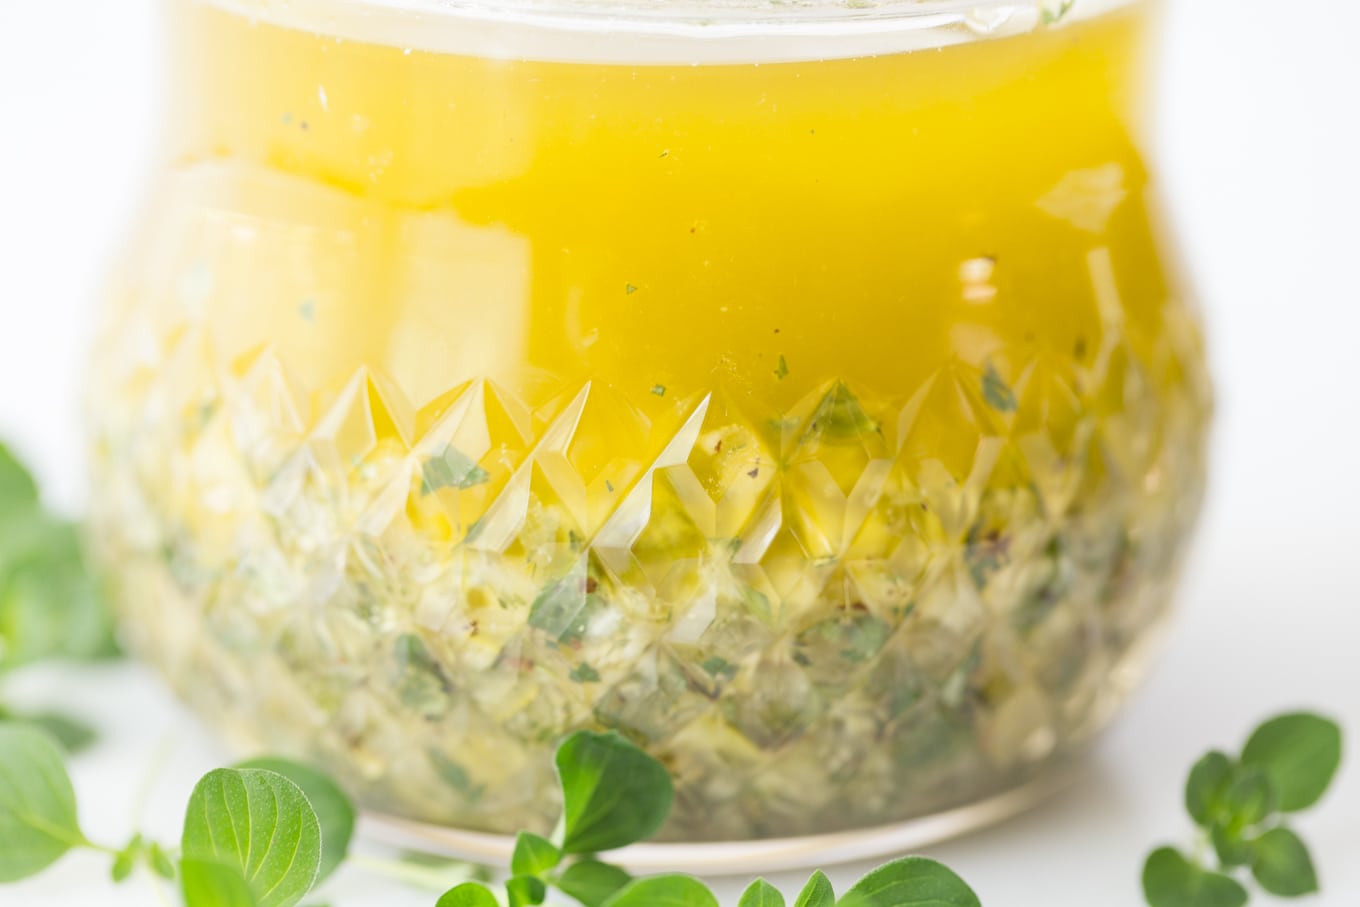 With bright, fresh lemon flavor, this Lemon Oregano Salad Dressing is delicious on just about any salad; but how about on grilled chicken, shrimp and pork, roasted veggies, steamed potatoes ... everything? thecafesucrefarine.com